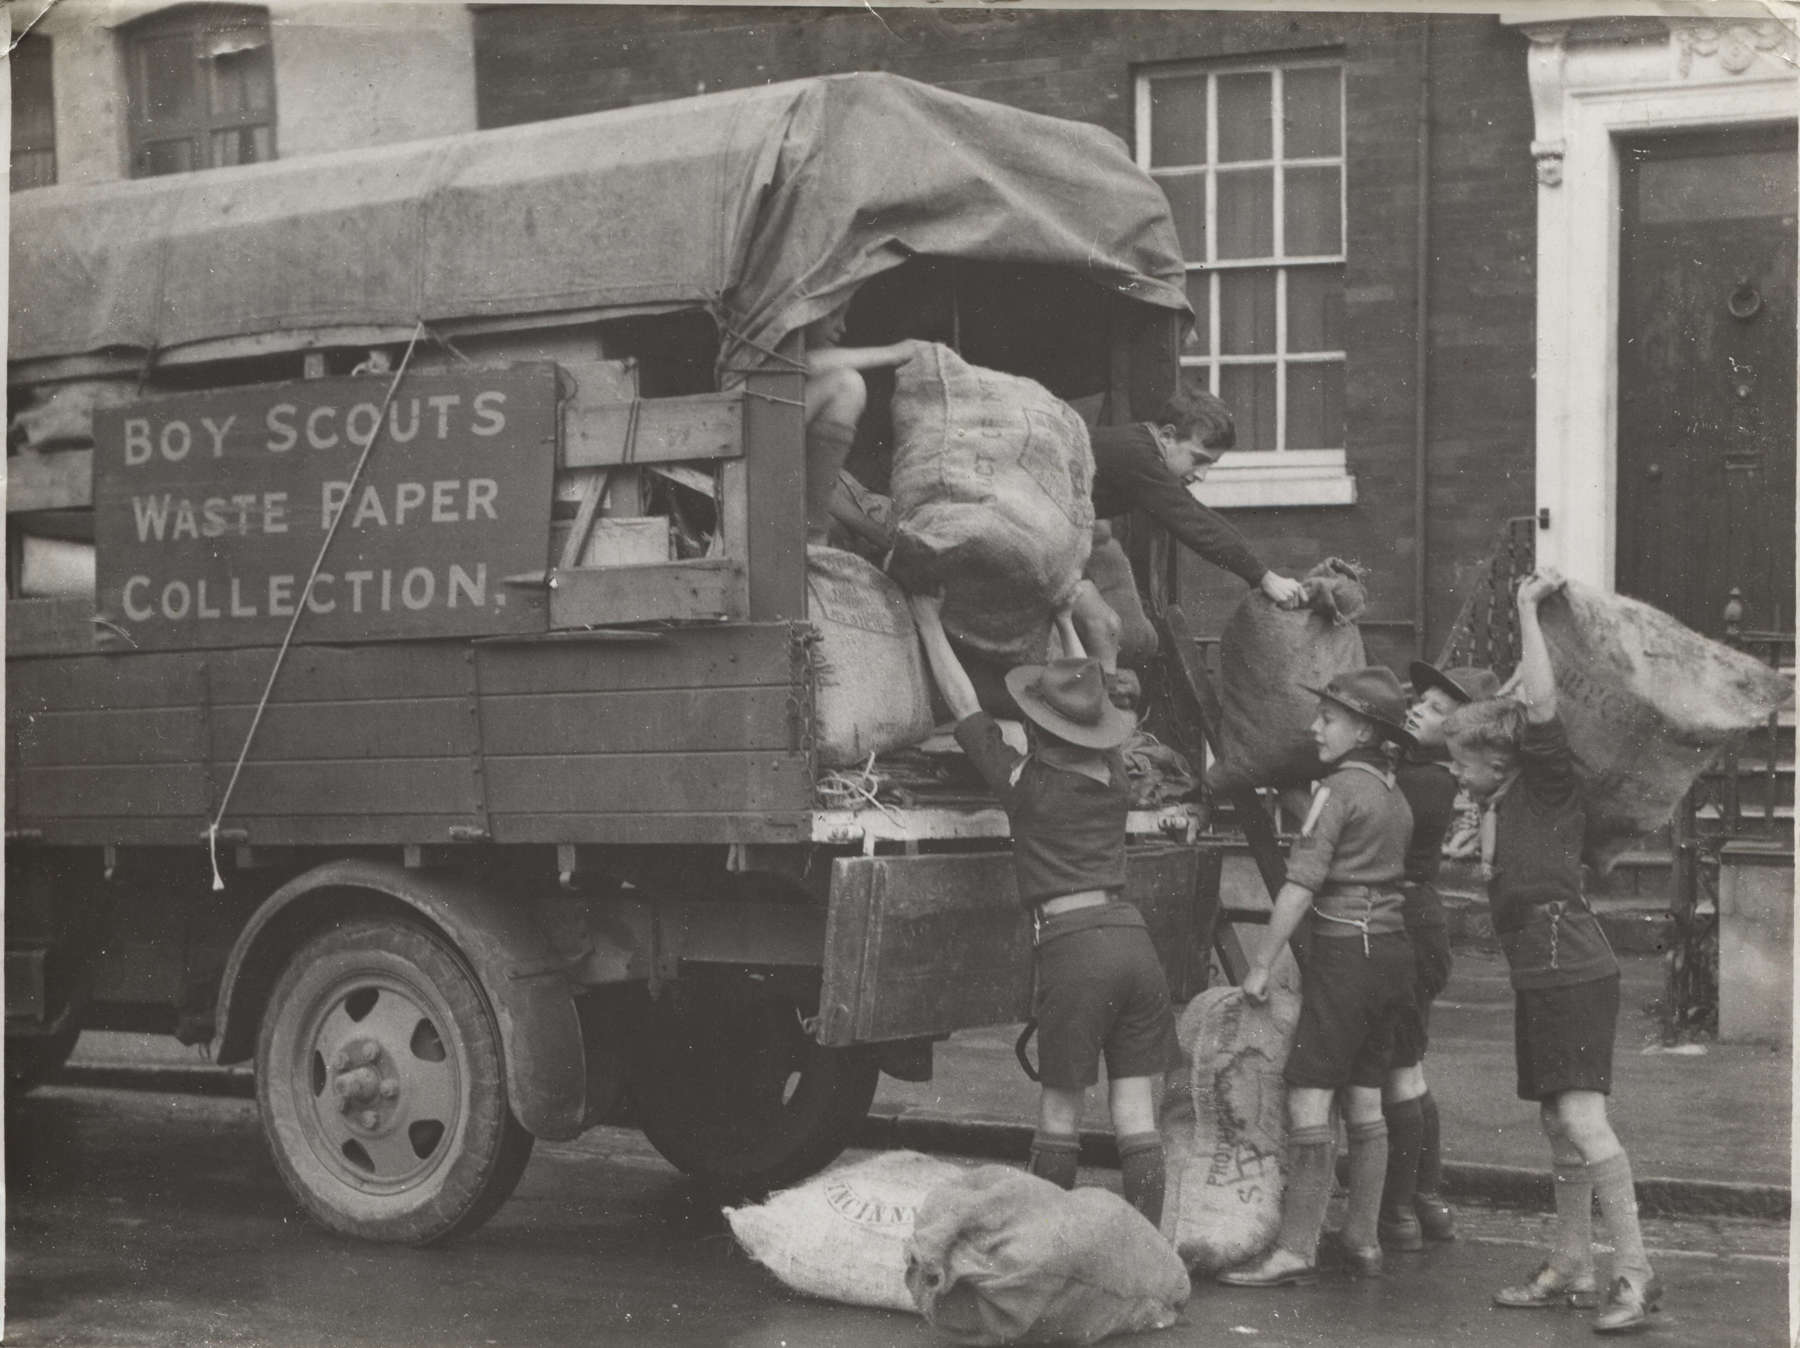 Black and white photo of Scouts loading packages into the back of a truck that has 'Boy Scouts Waste Paper Collection' written on the side